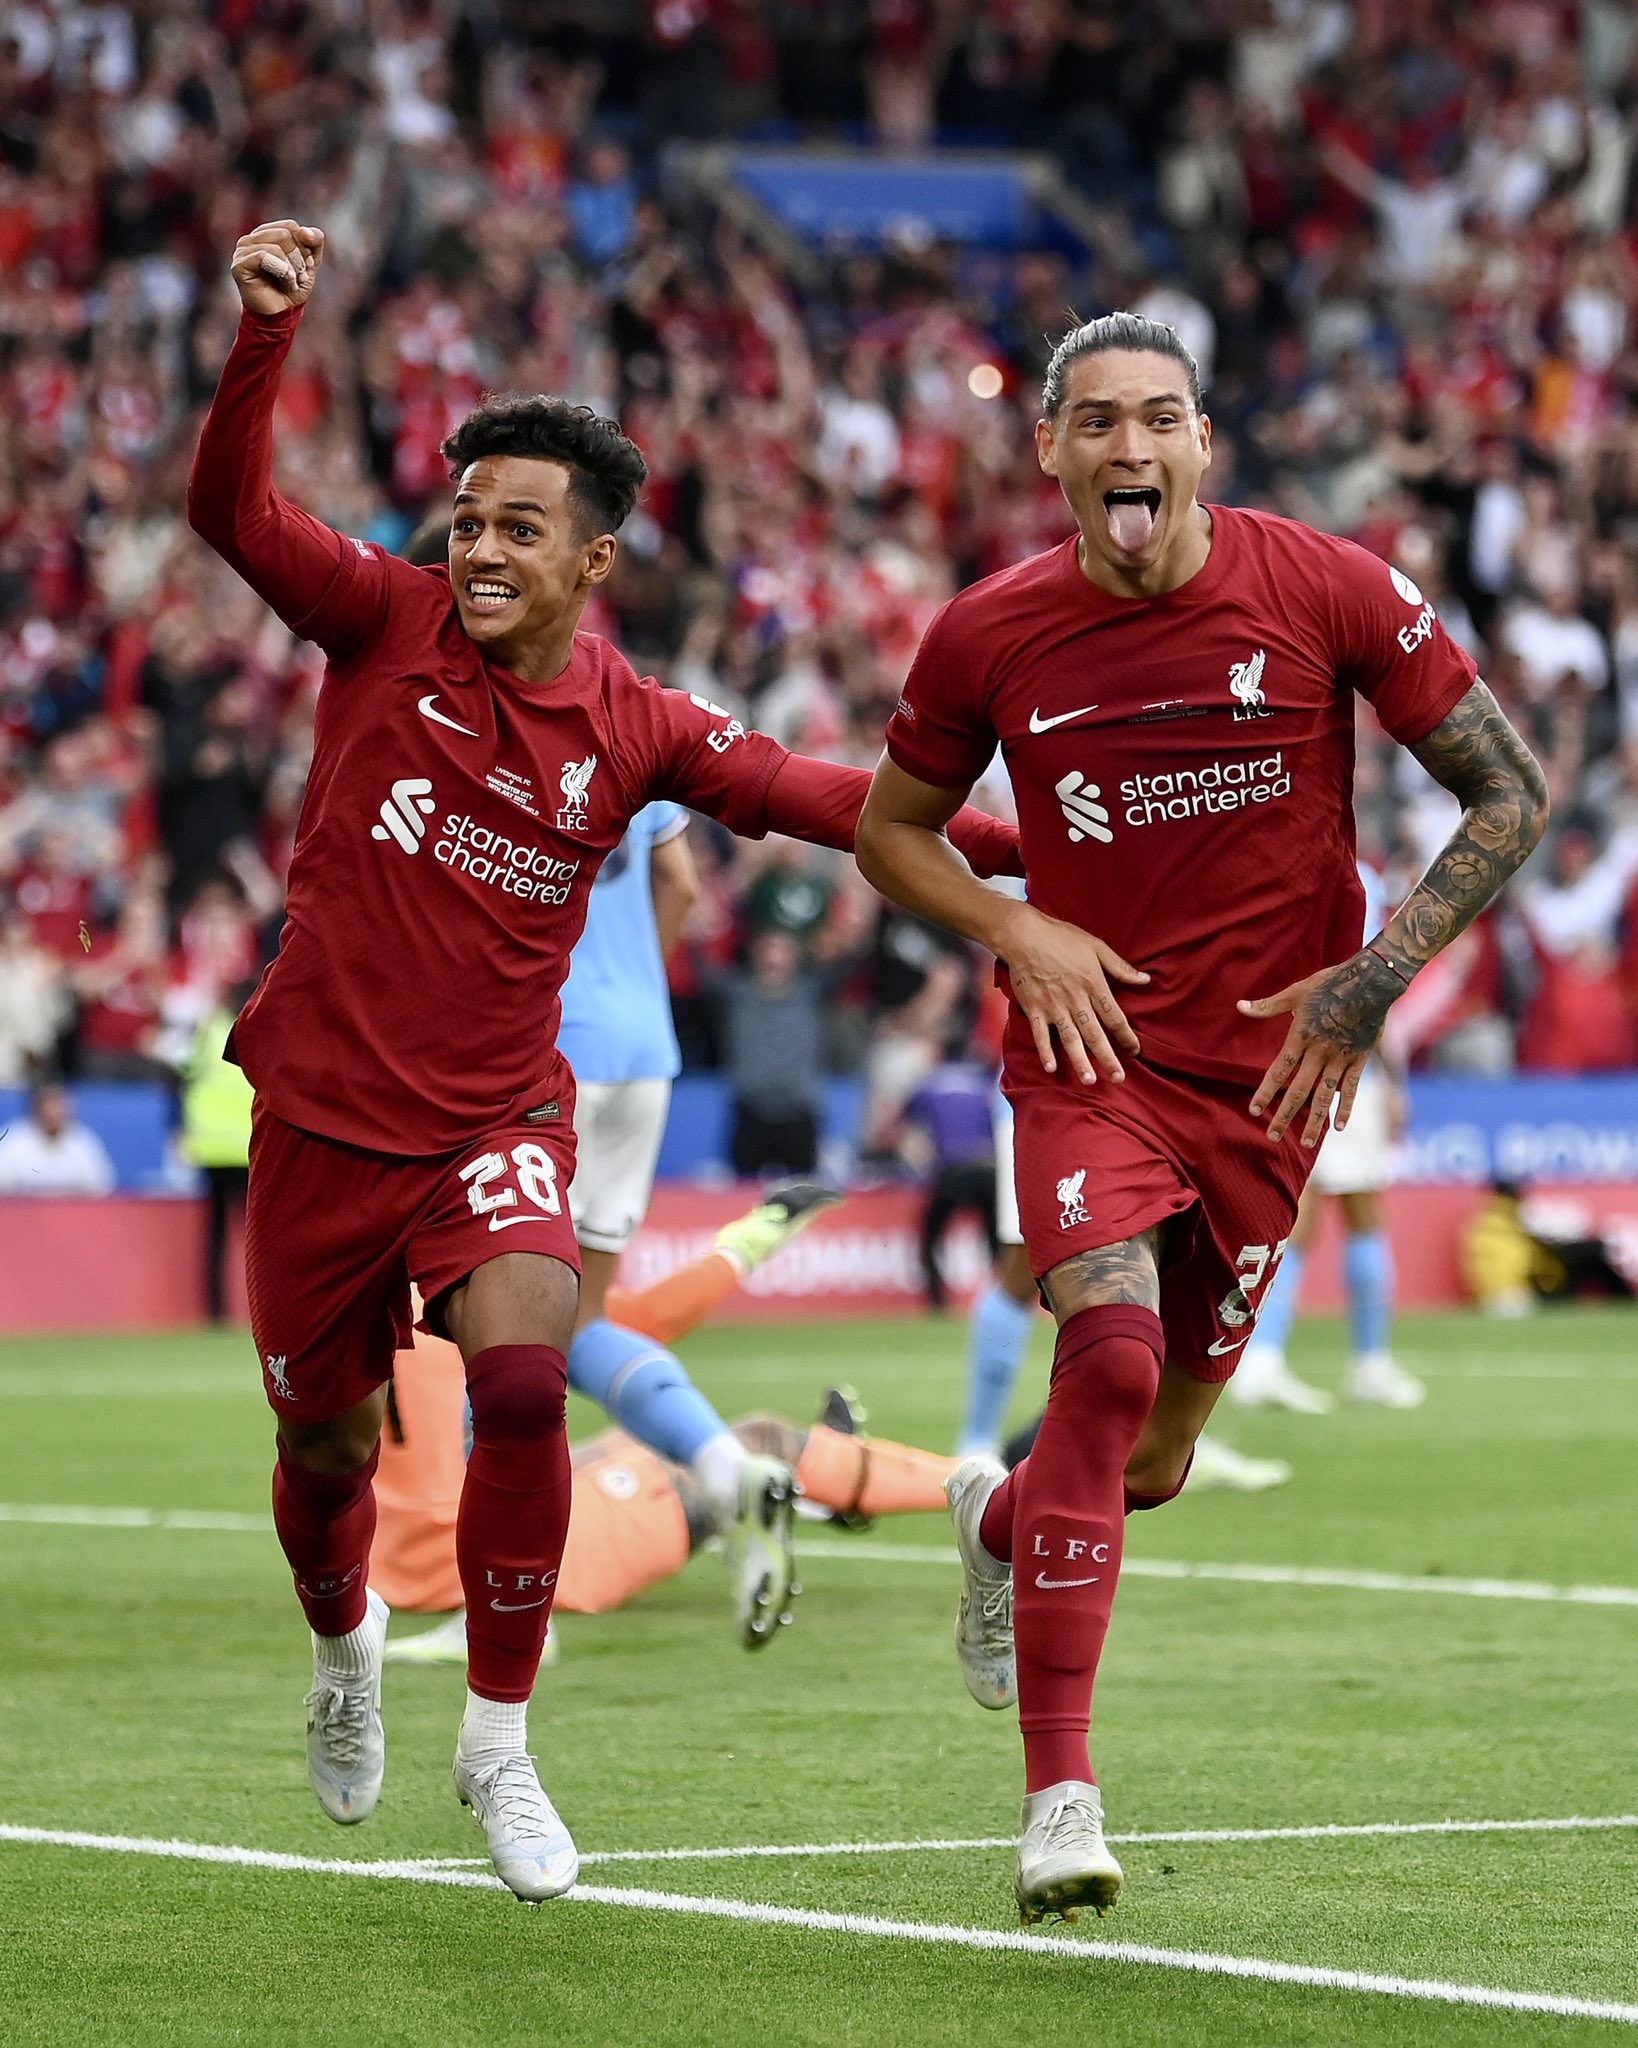 Liverpool Beat Man City To Land 16th Community Shield Title